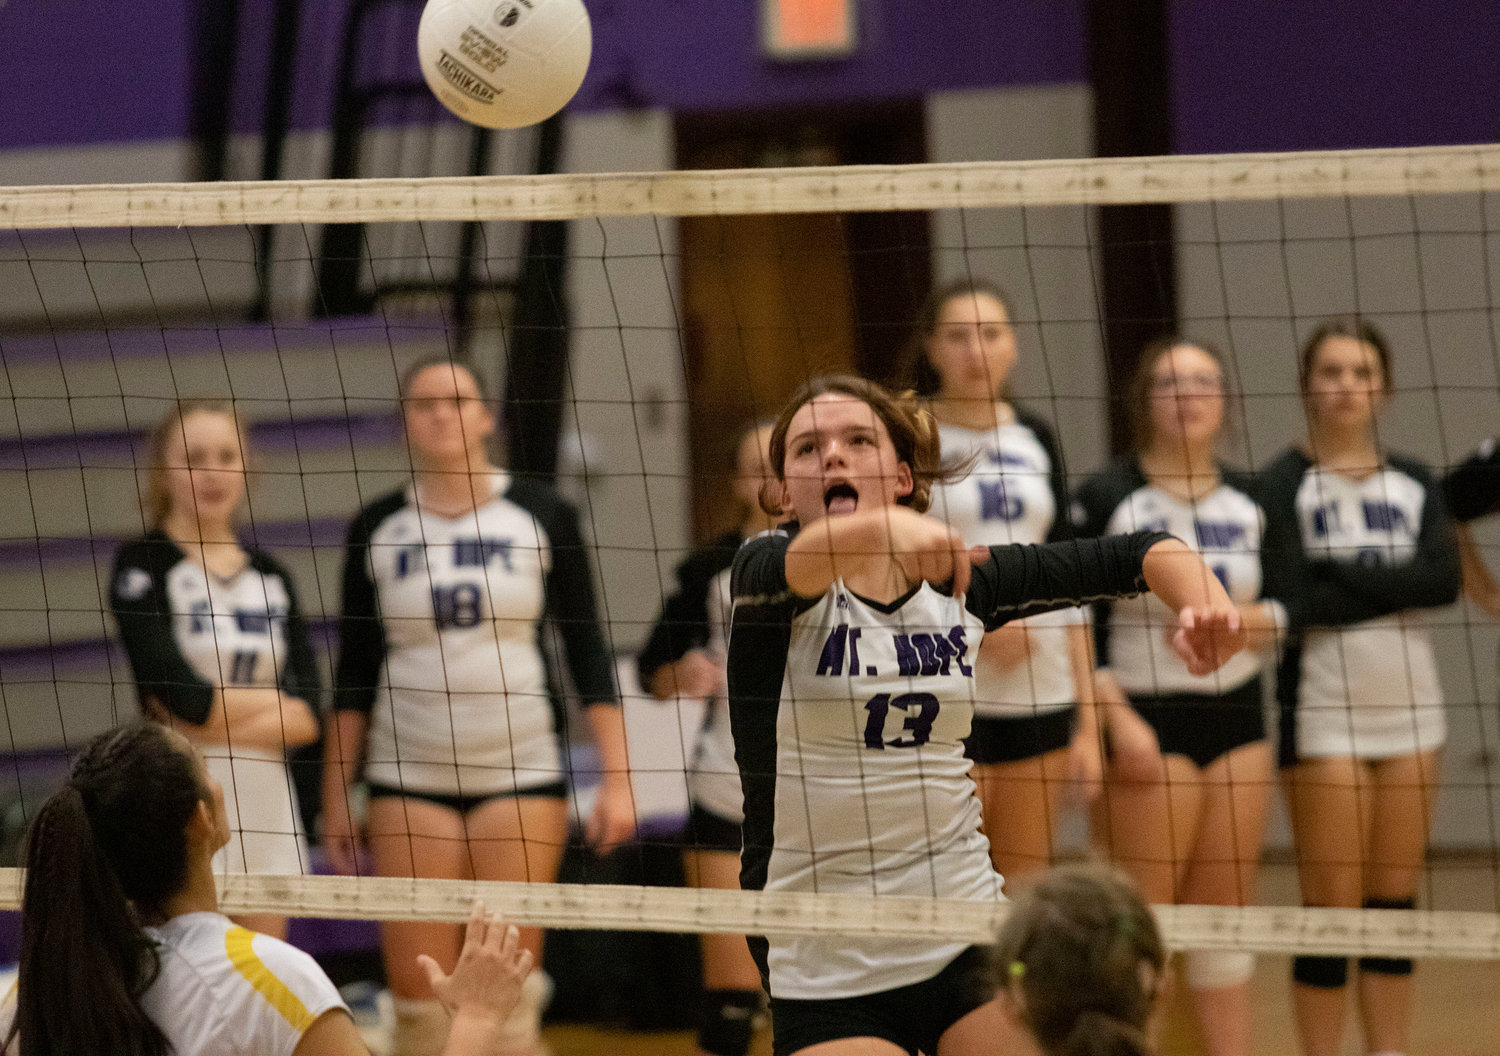 Junior co-captain Mia Shaw volleys the ball over the net during the Huskies home win over North Smithfield on Friday night.